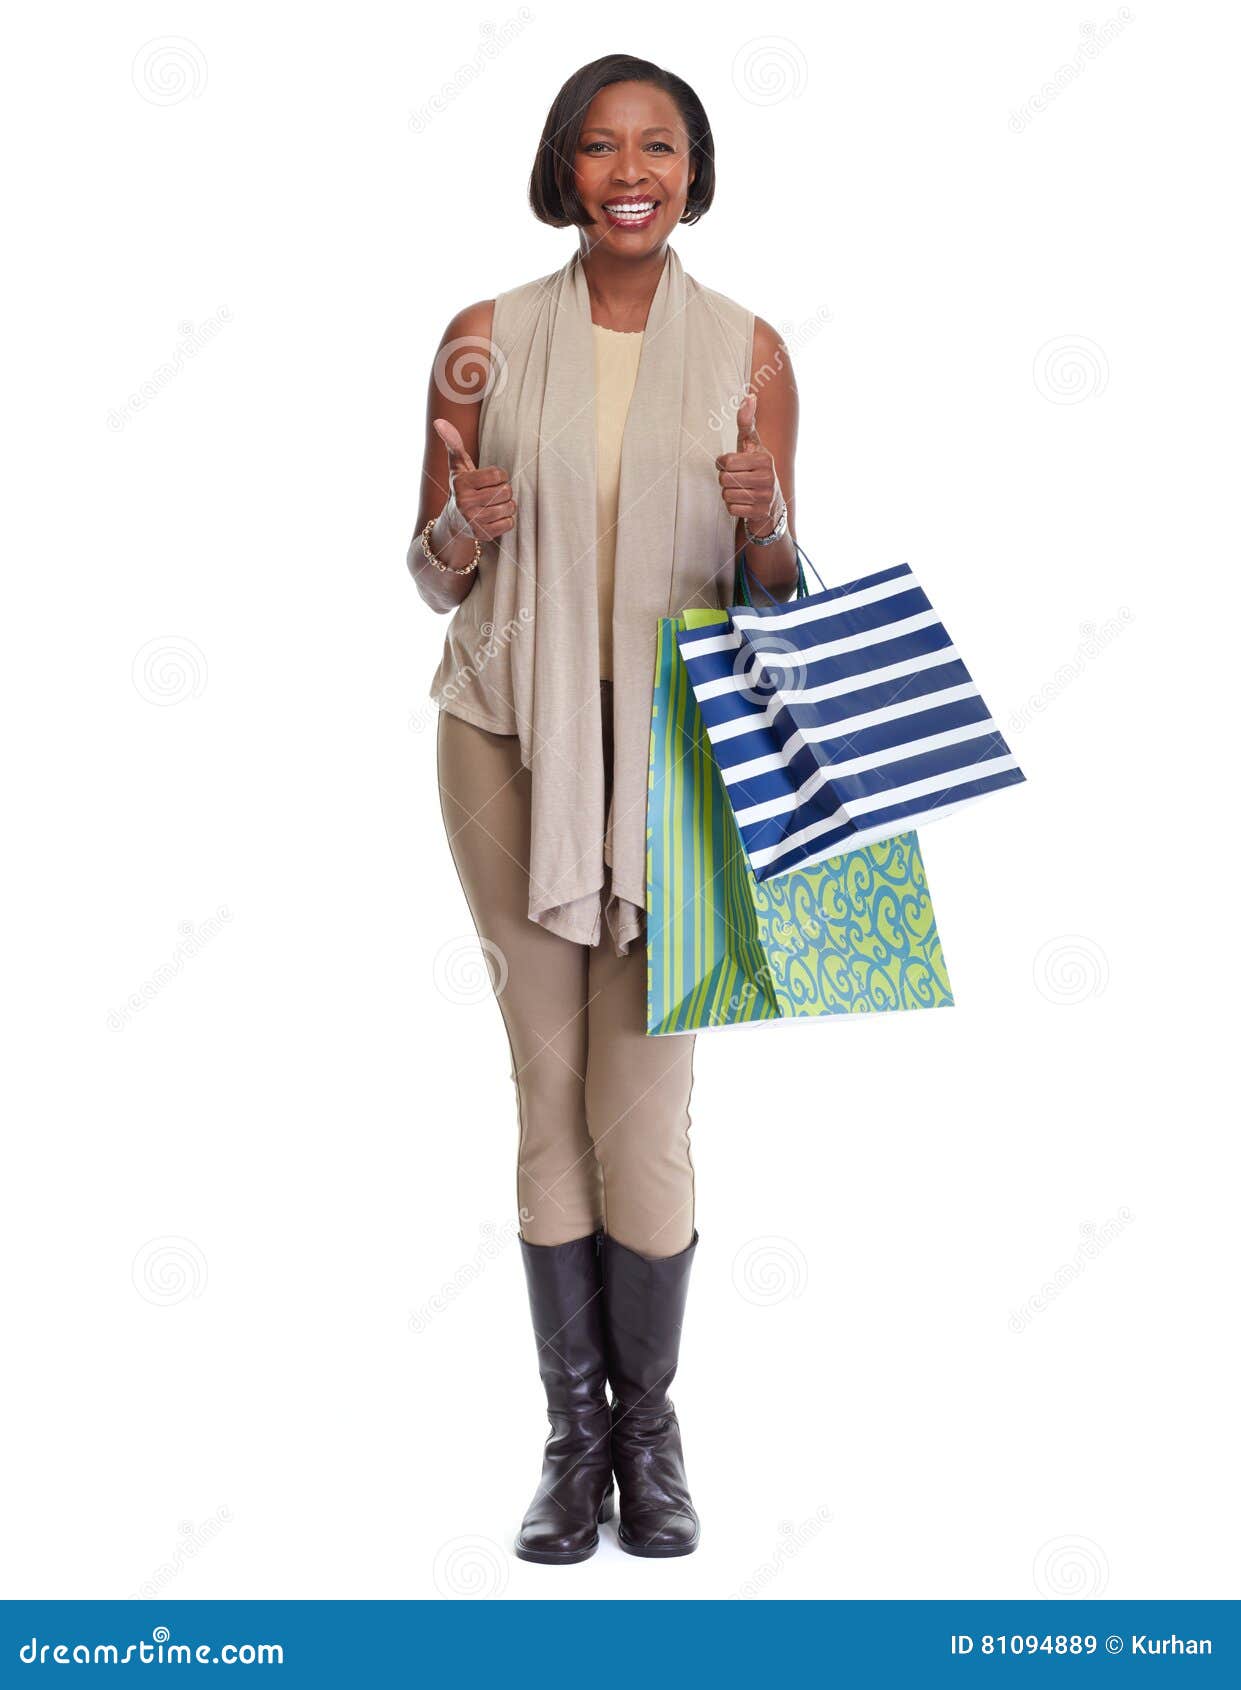 African-American Shopping Woman. Stock Image - Image of cheerful, beautiful: 81094889